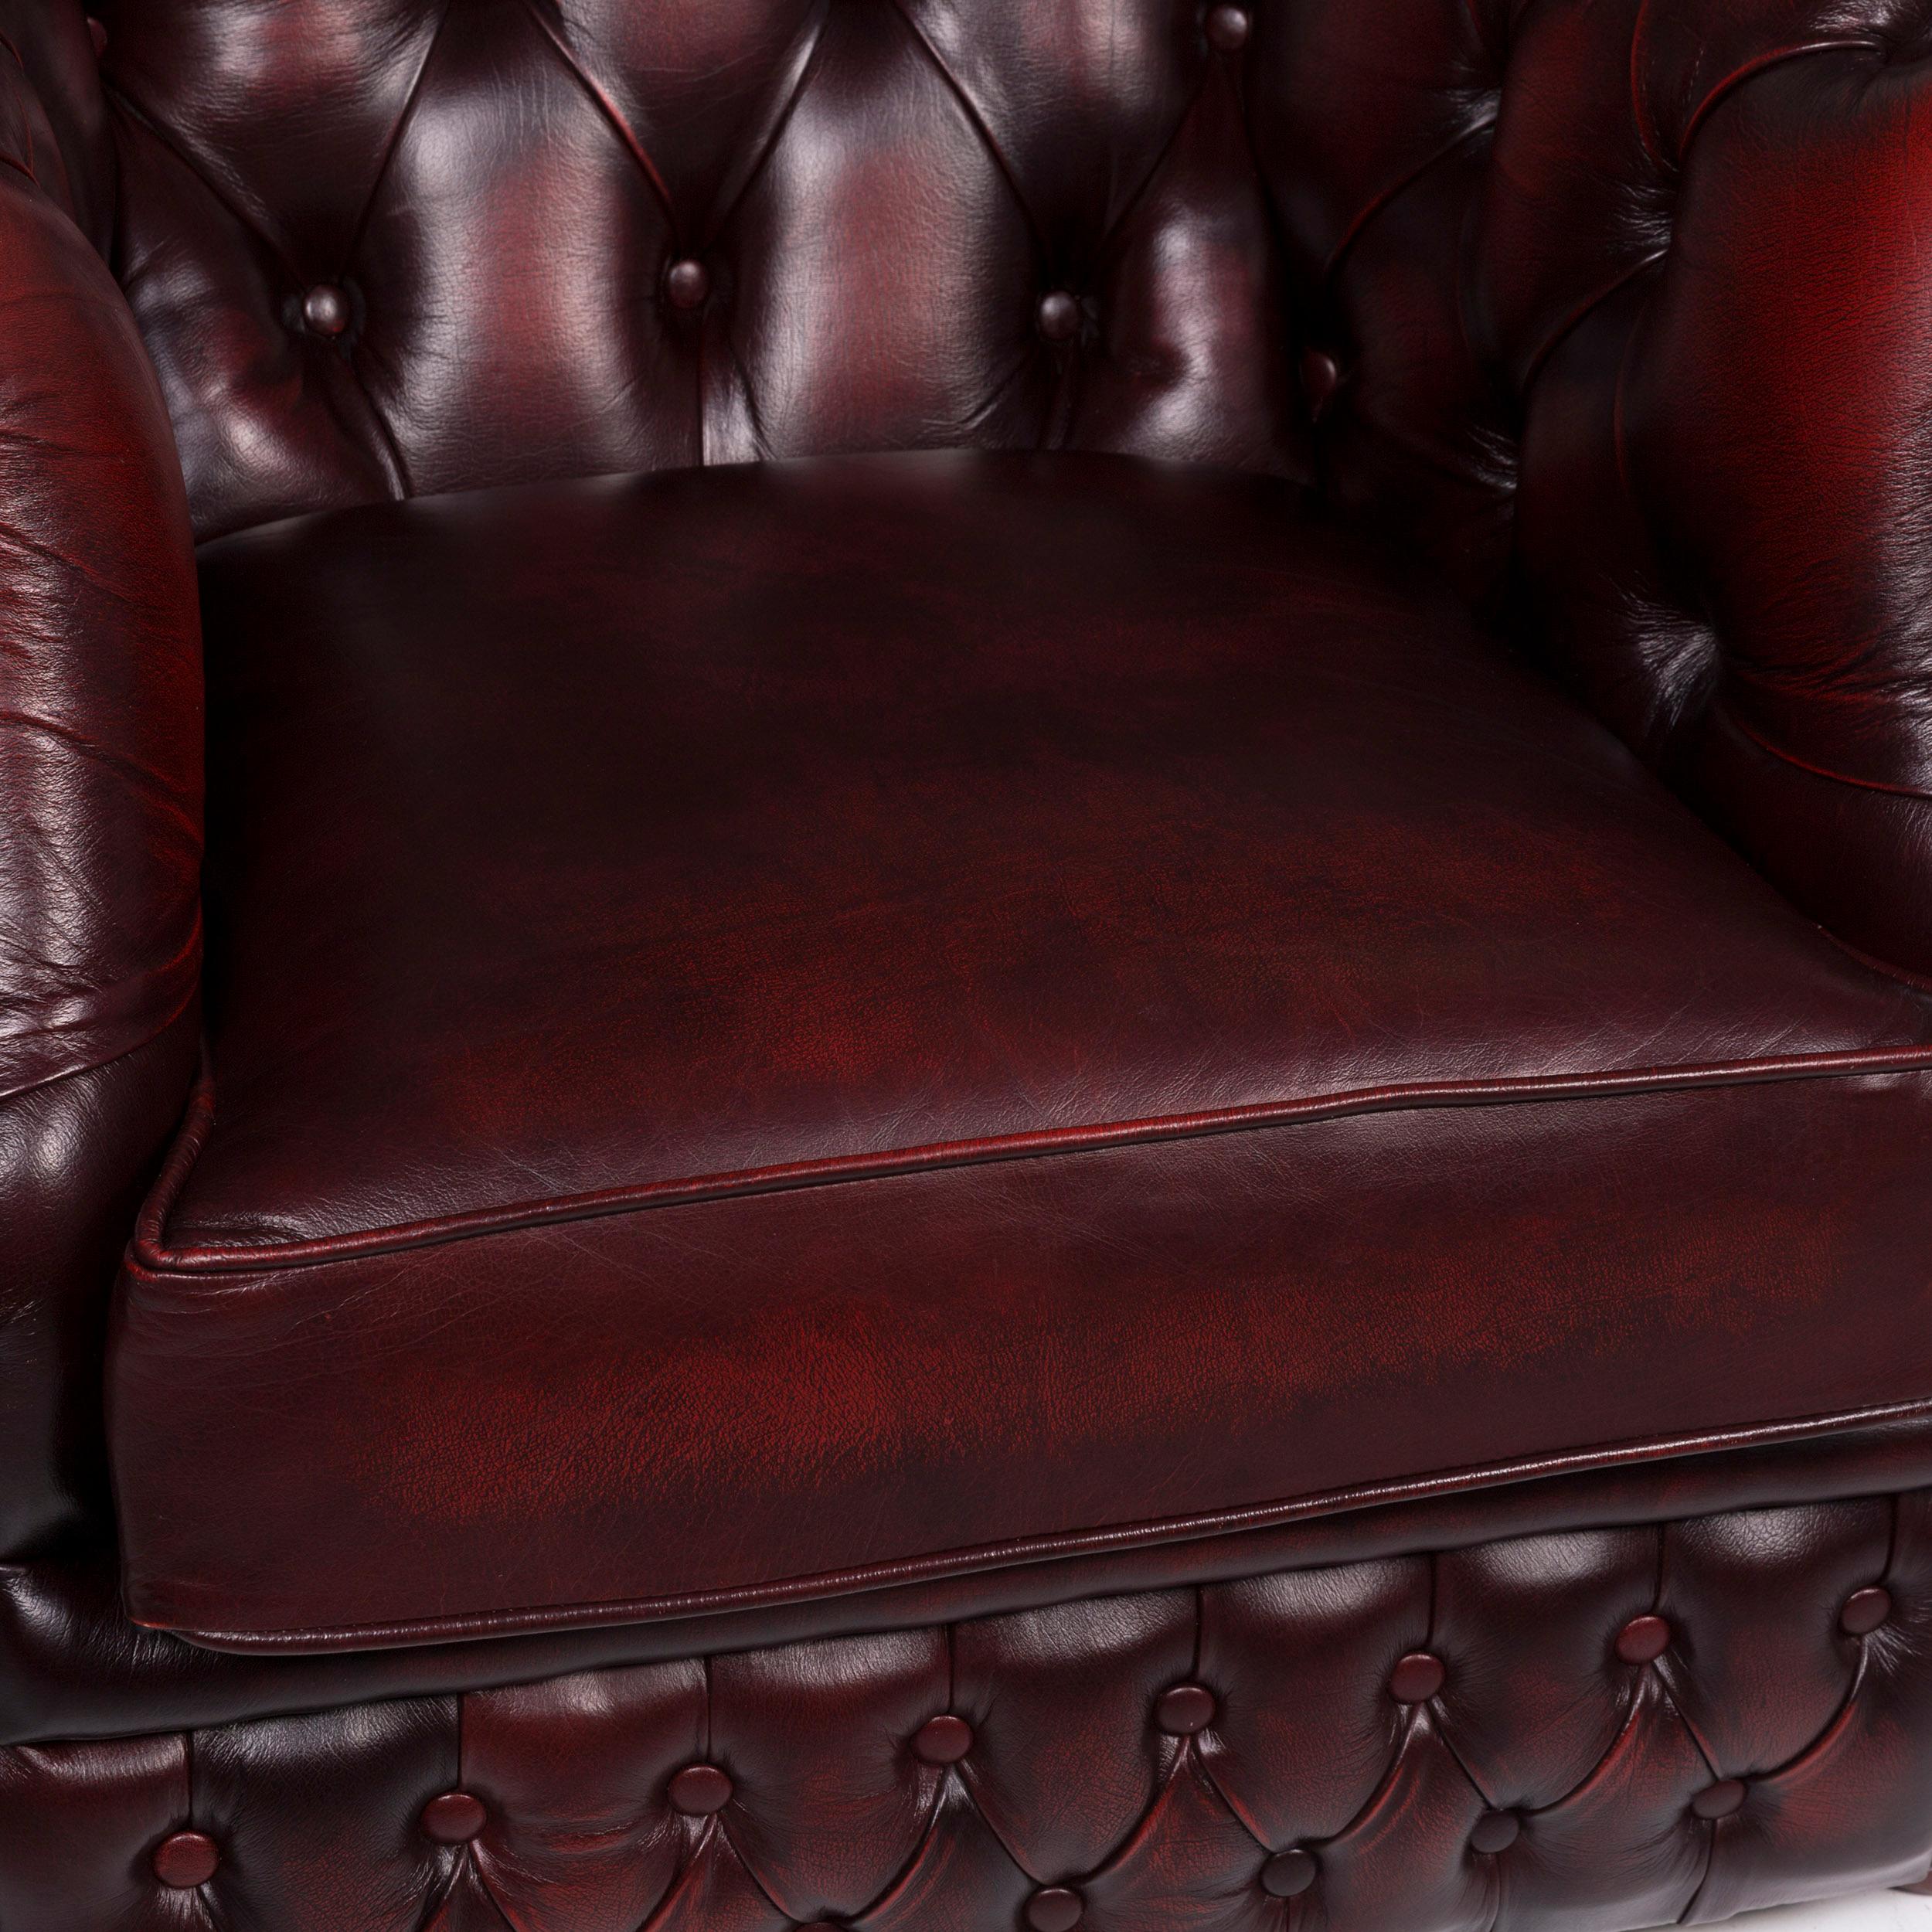 We bring to you a Centurion leather armchair red.
   
 

 Product measurements in centimeters:
 

 Depth 92
Width 105
Height 81
Seat-height 48
Rest-height 67
Seat-depth 55
Seat-width 48
Back-height 39.